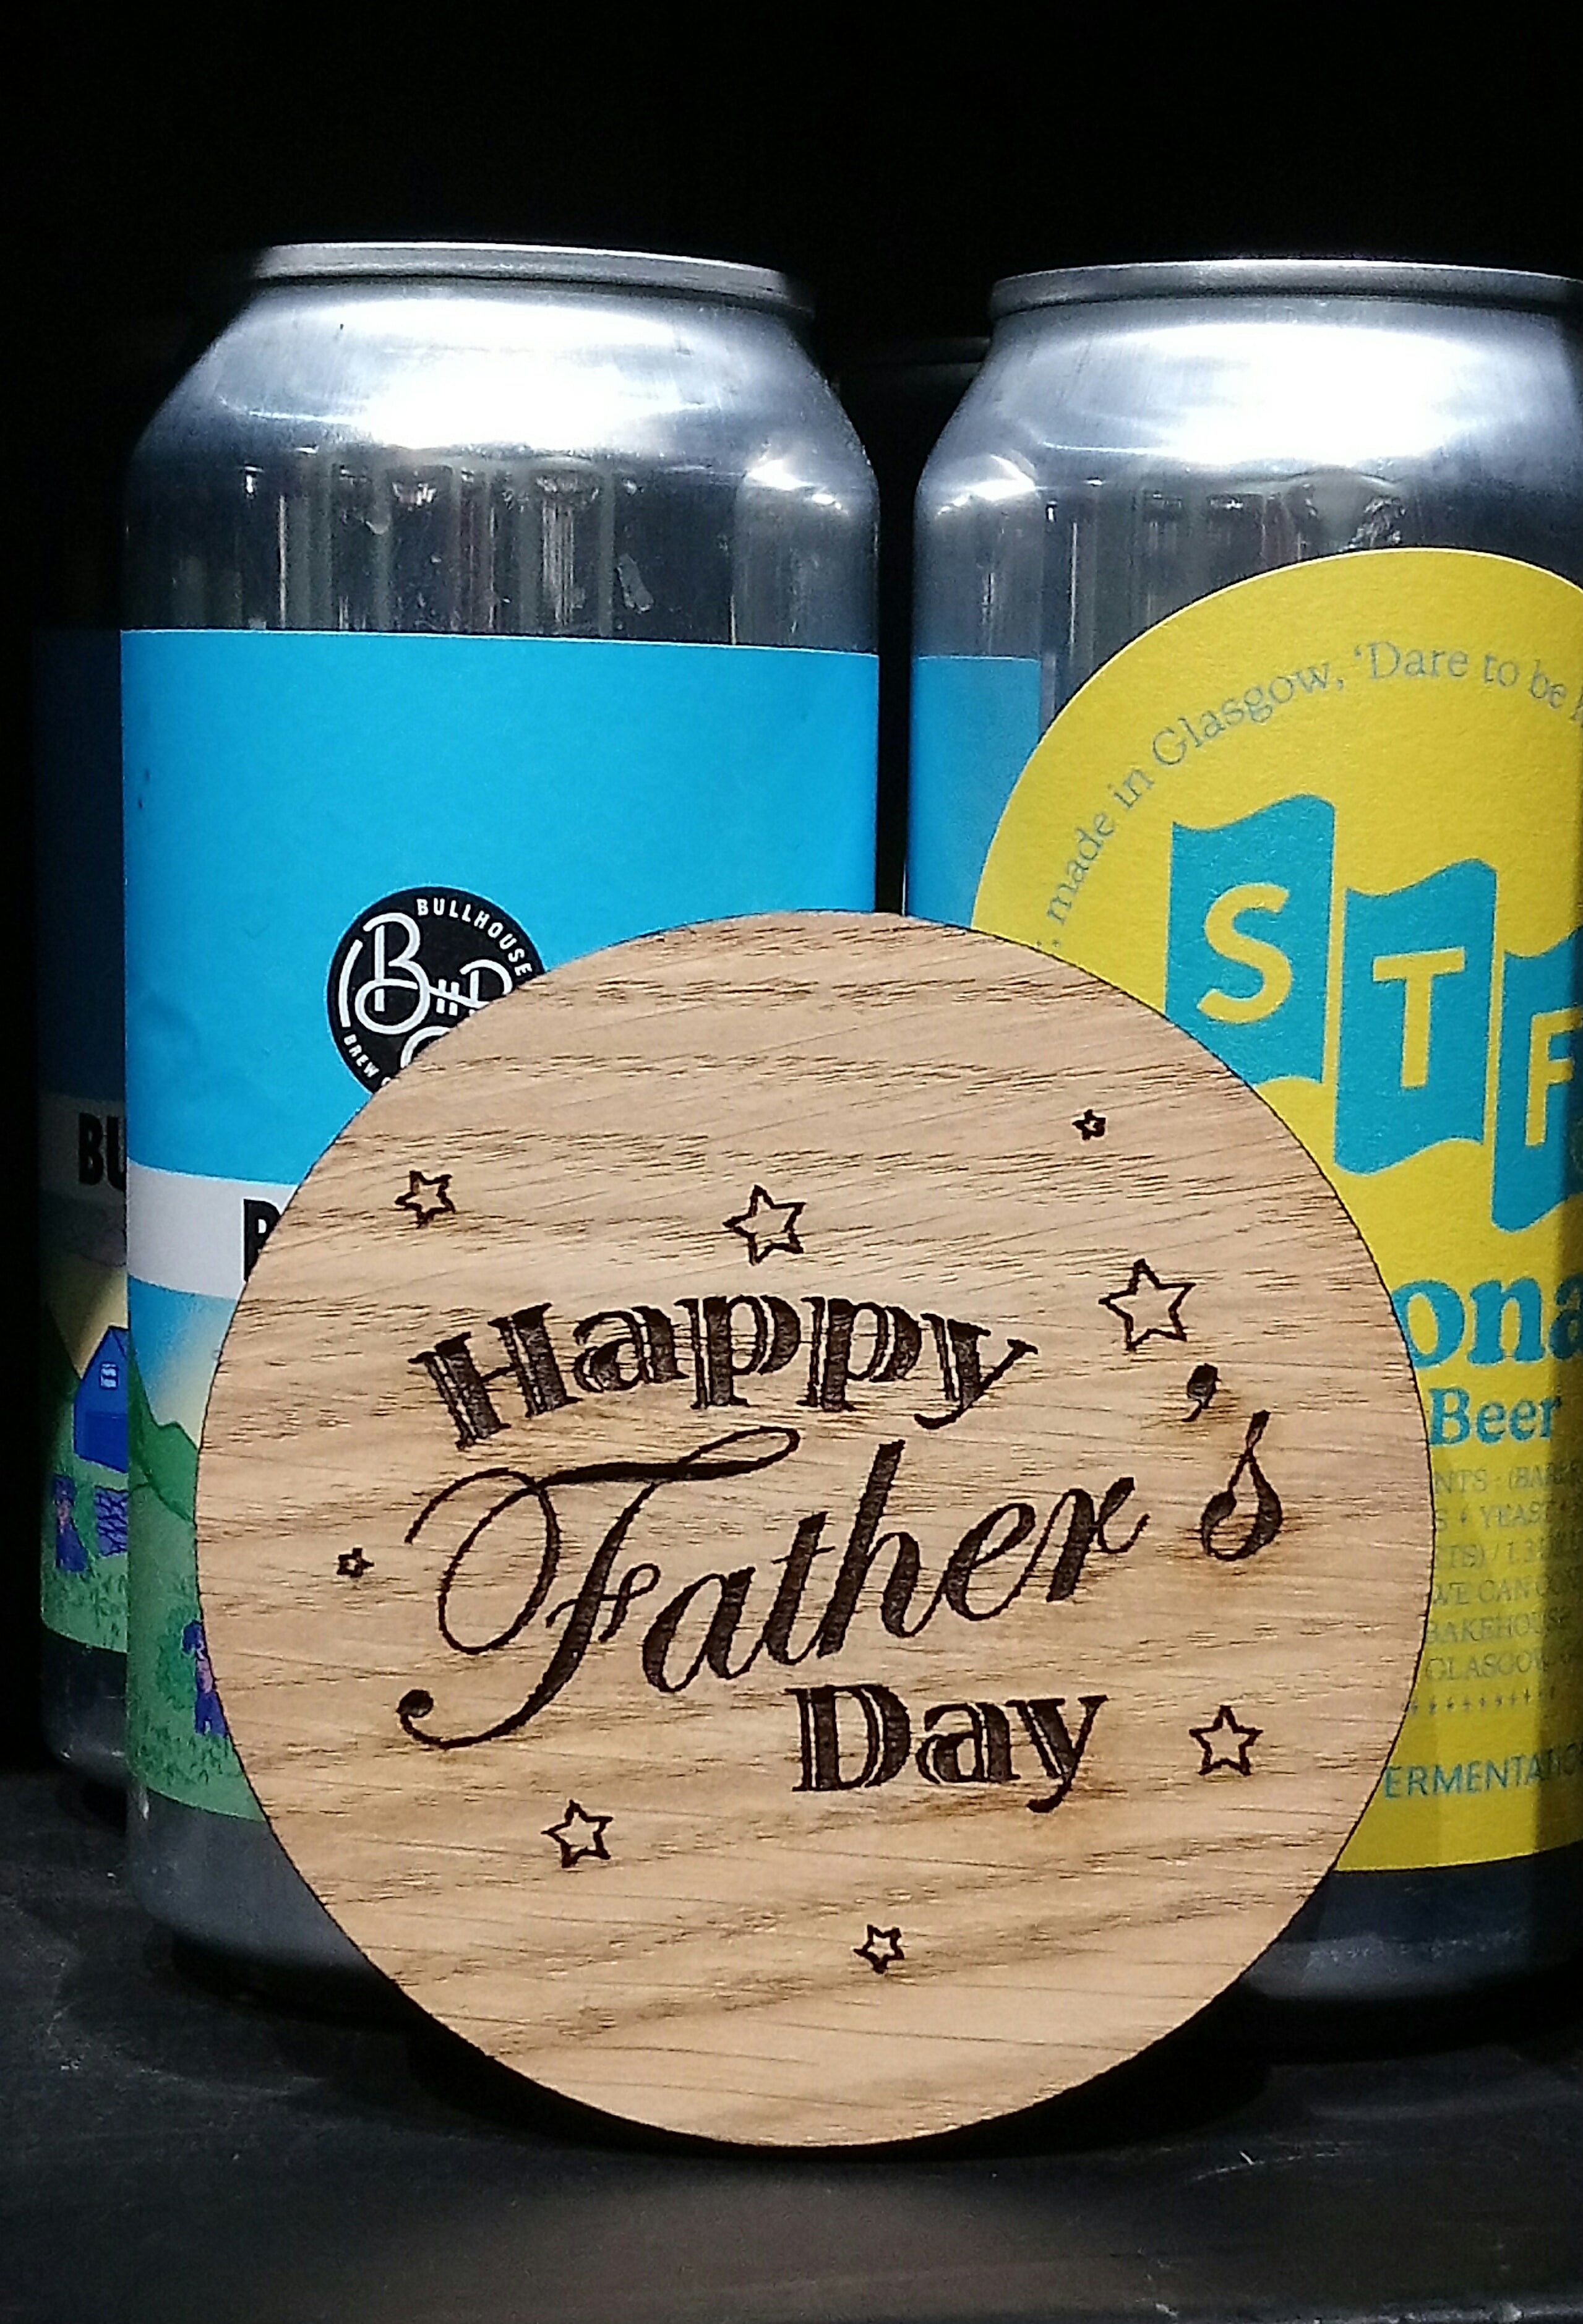 FATHER'S DAY Themed Coasters by Rezawood Designs